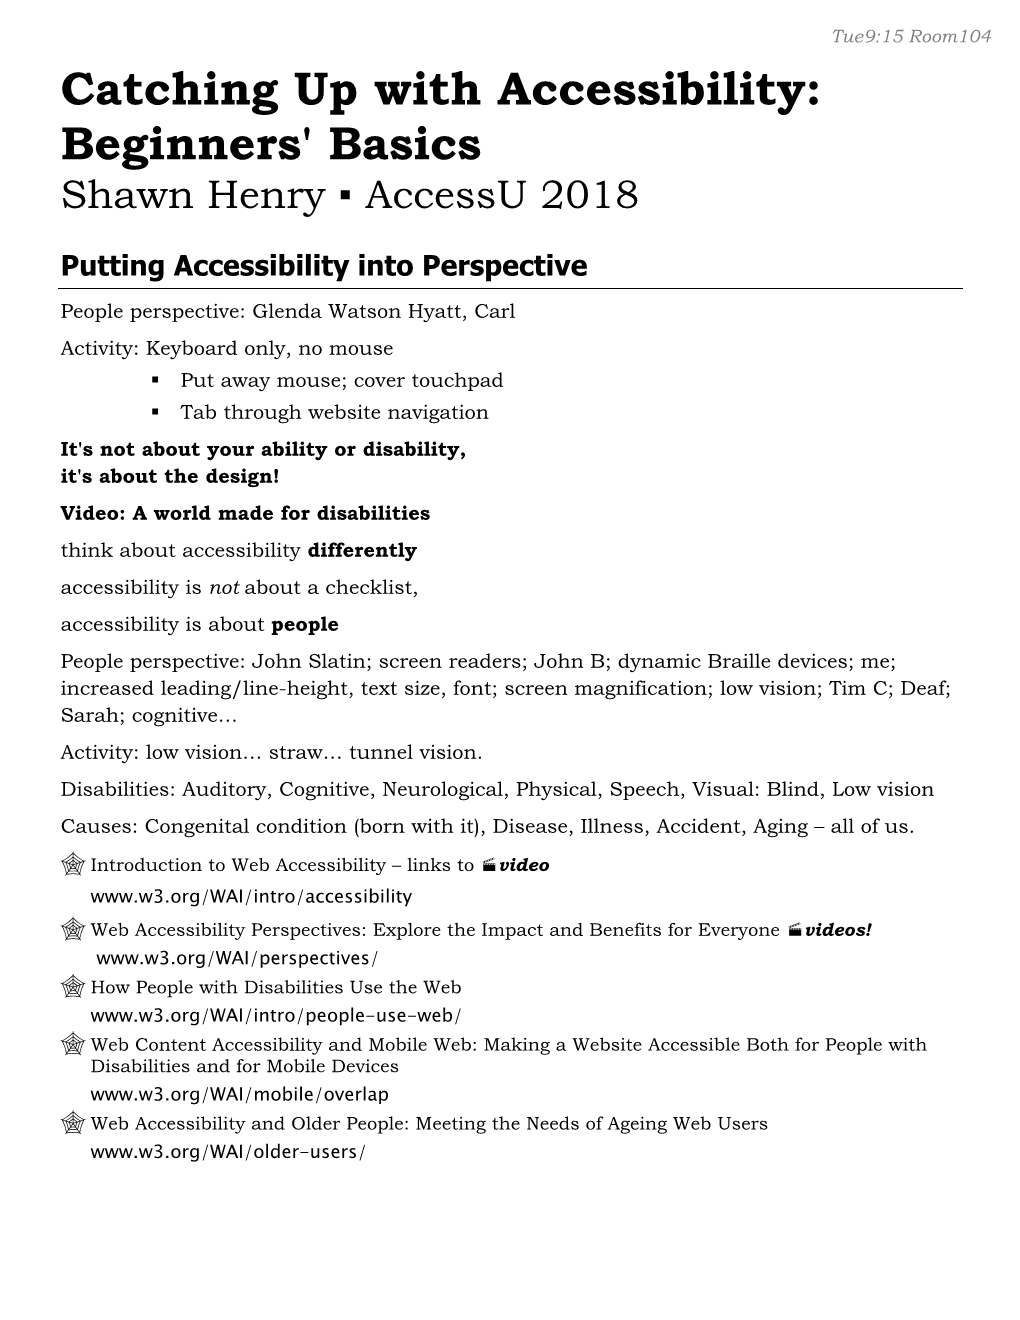 Catching up with Accessibility: Beginners' Basics Shawn Henry ▪ Accessu 2018